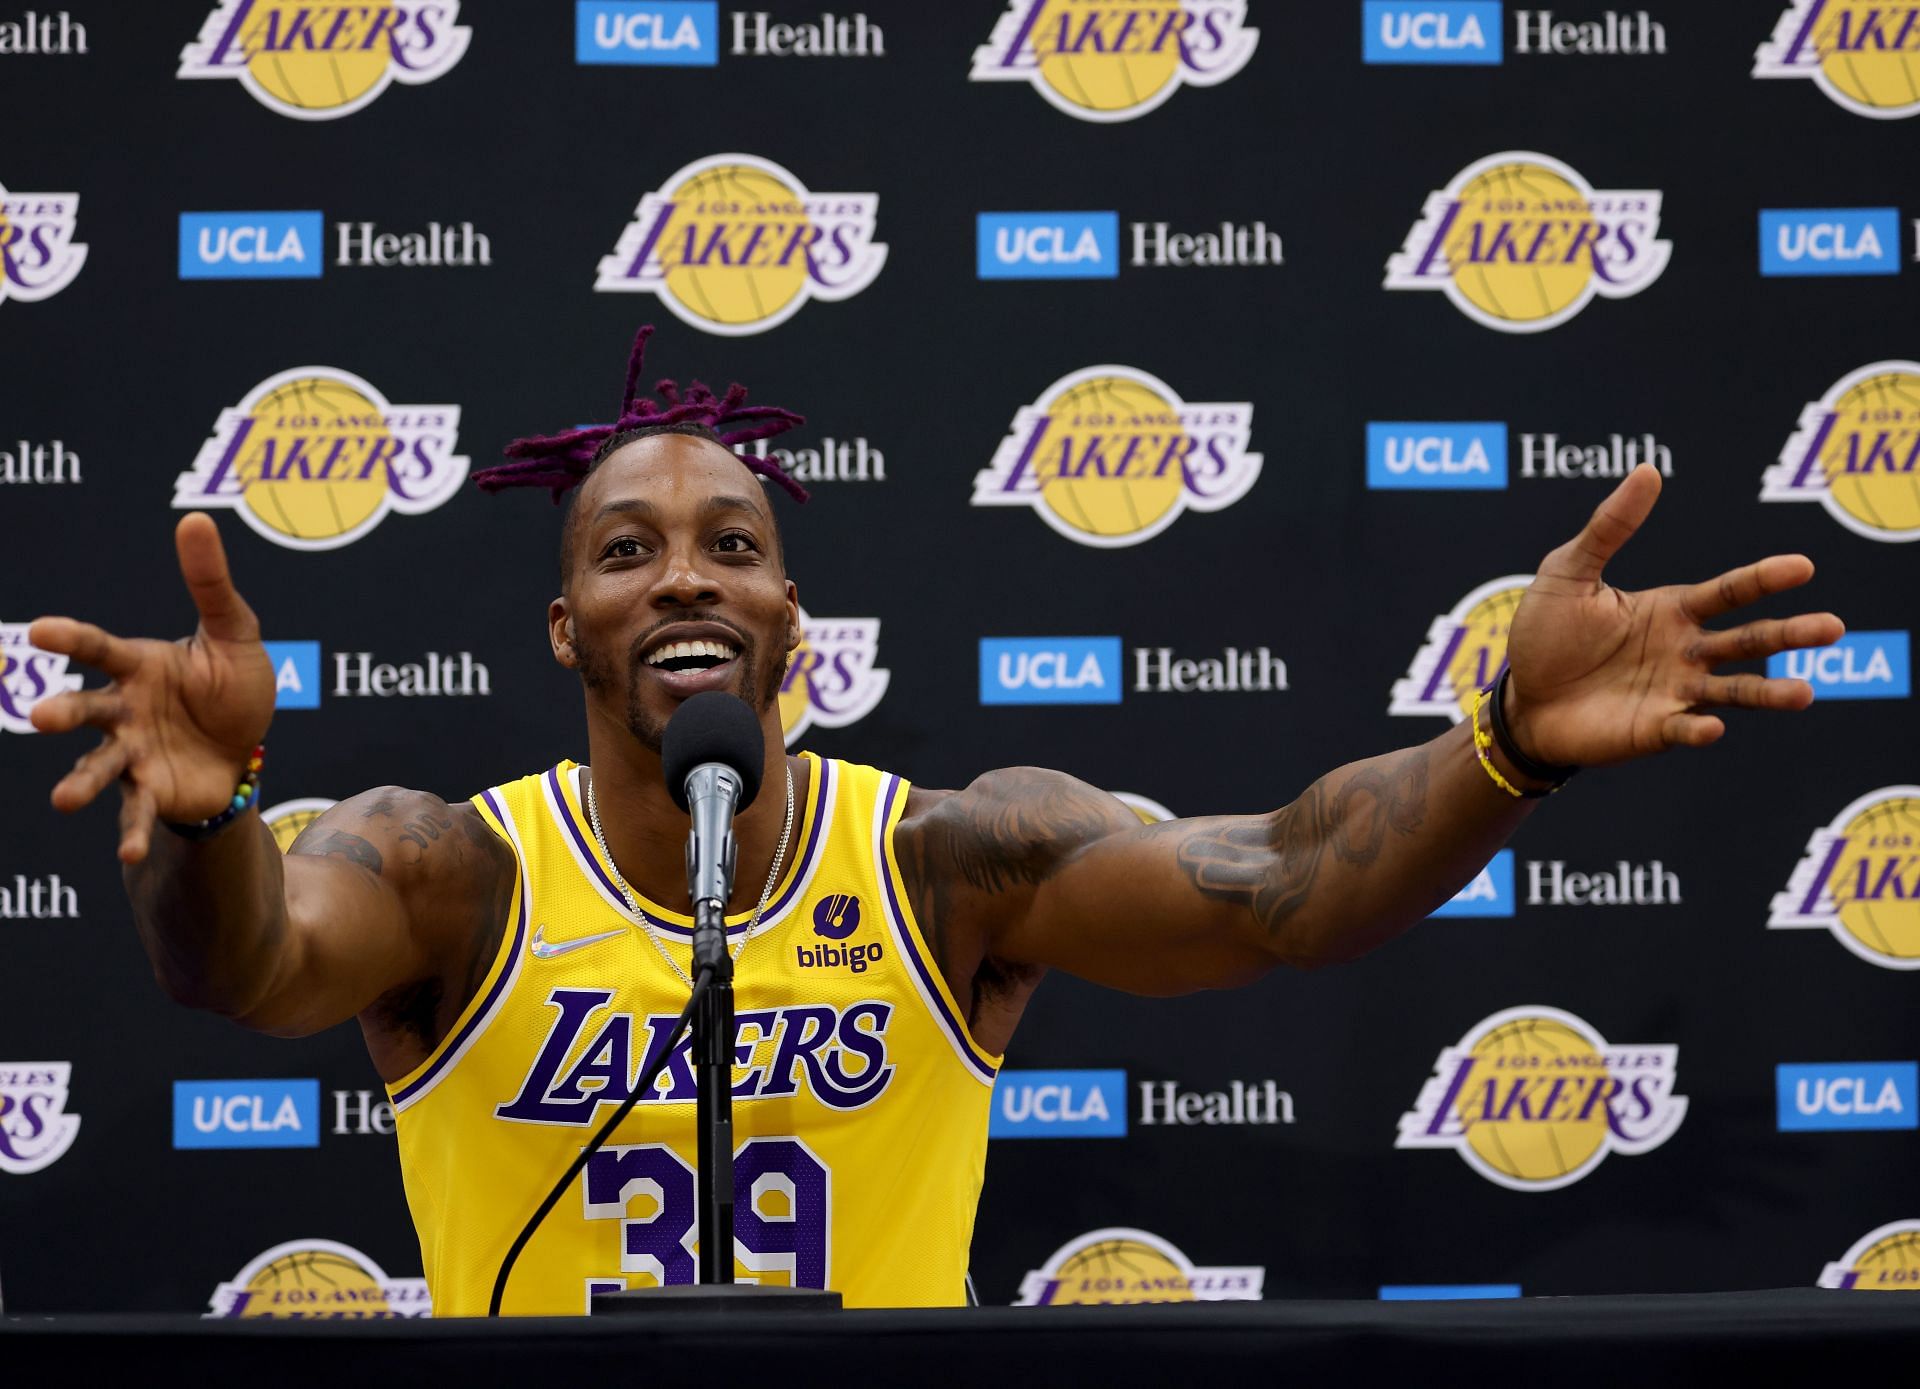 LA Lakers center Dwight Howard was excluded from the NBA 75th-anniversary team